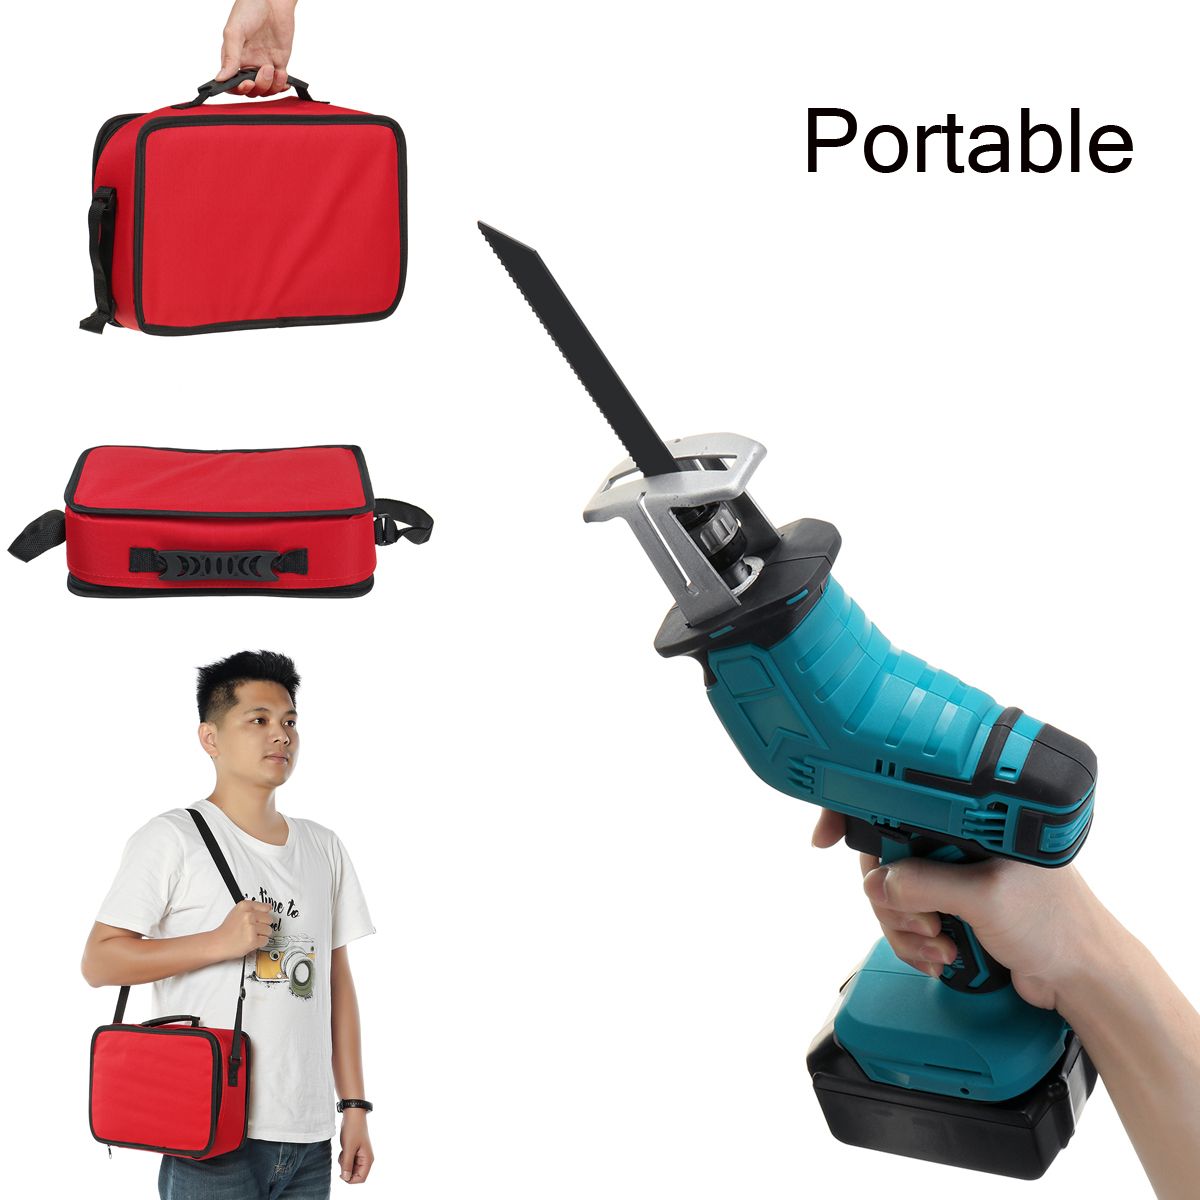 68V-Electric-Reciprocating-Saw-Outdoor-Woodworking-Cordless-Handheld-Saw-9000mah-1683596